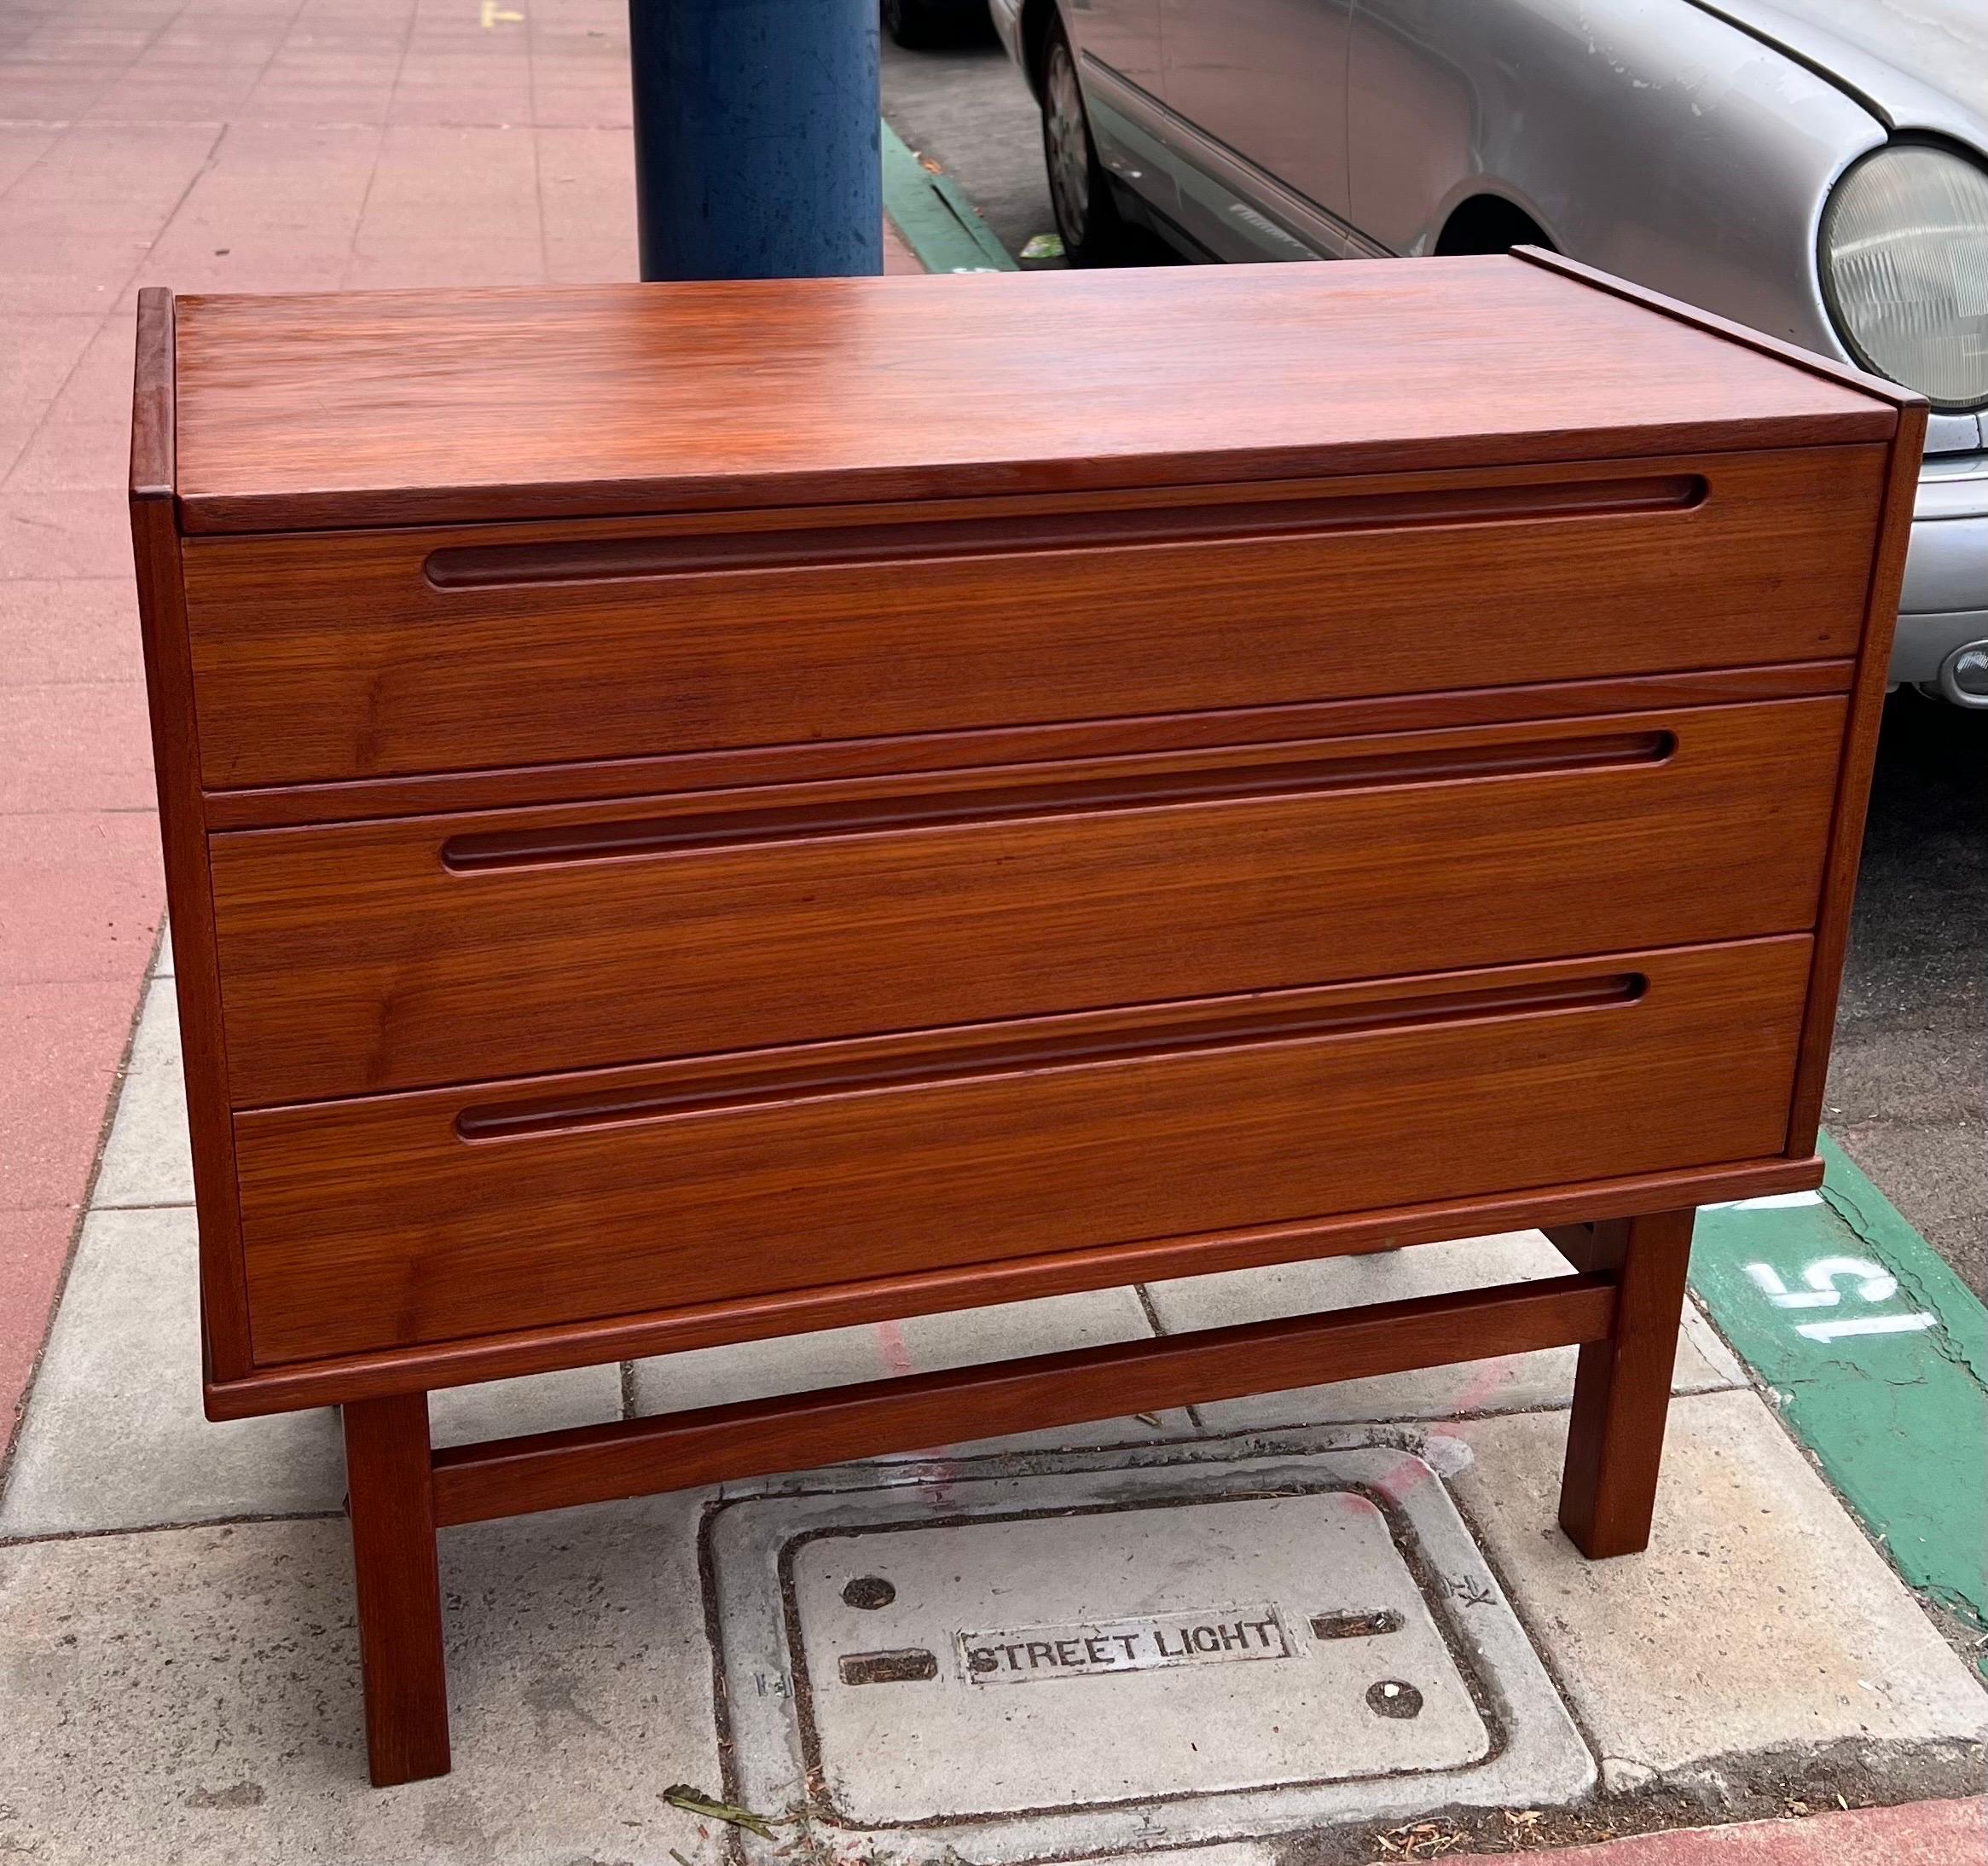 Beautiful Danish modern teak vanity dressing table, circa the 1960s, designed by Nils Jonsson for Johnson for Torring Mobelfabrik and produced by HJN Mobler in Denmark. This piece is exceptional craftsmanship with a beautiful interior, construction